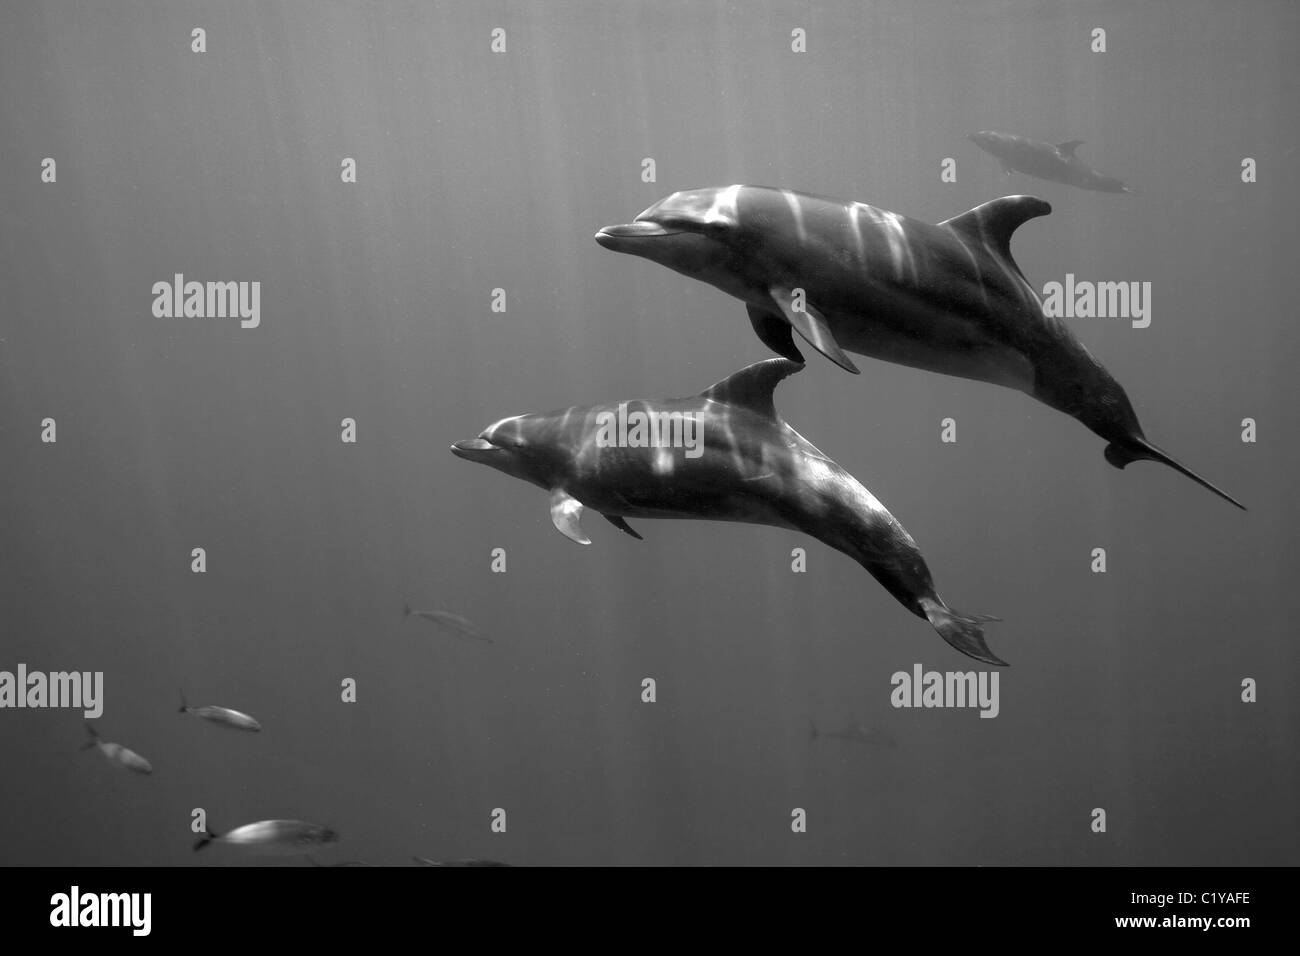 A pair of dolphins swims by at the Dos Amigos Grande dive site near the Cocos Island off the coast of Costa Rica. Stock Photo